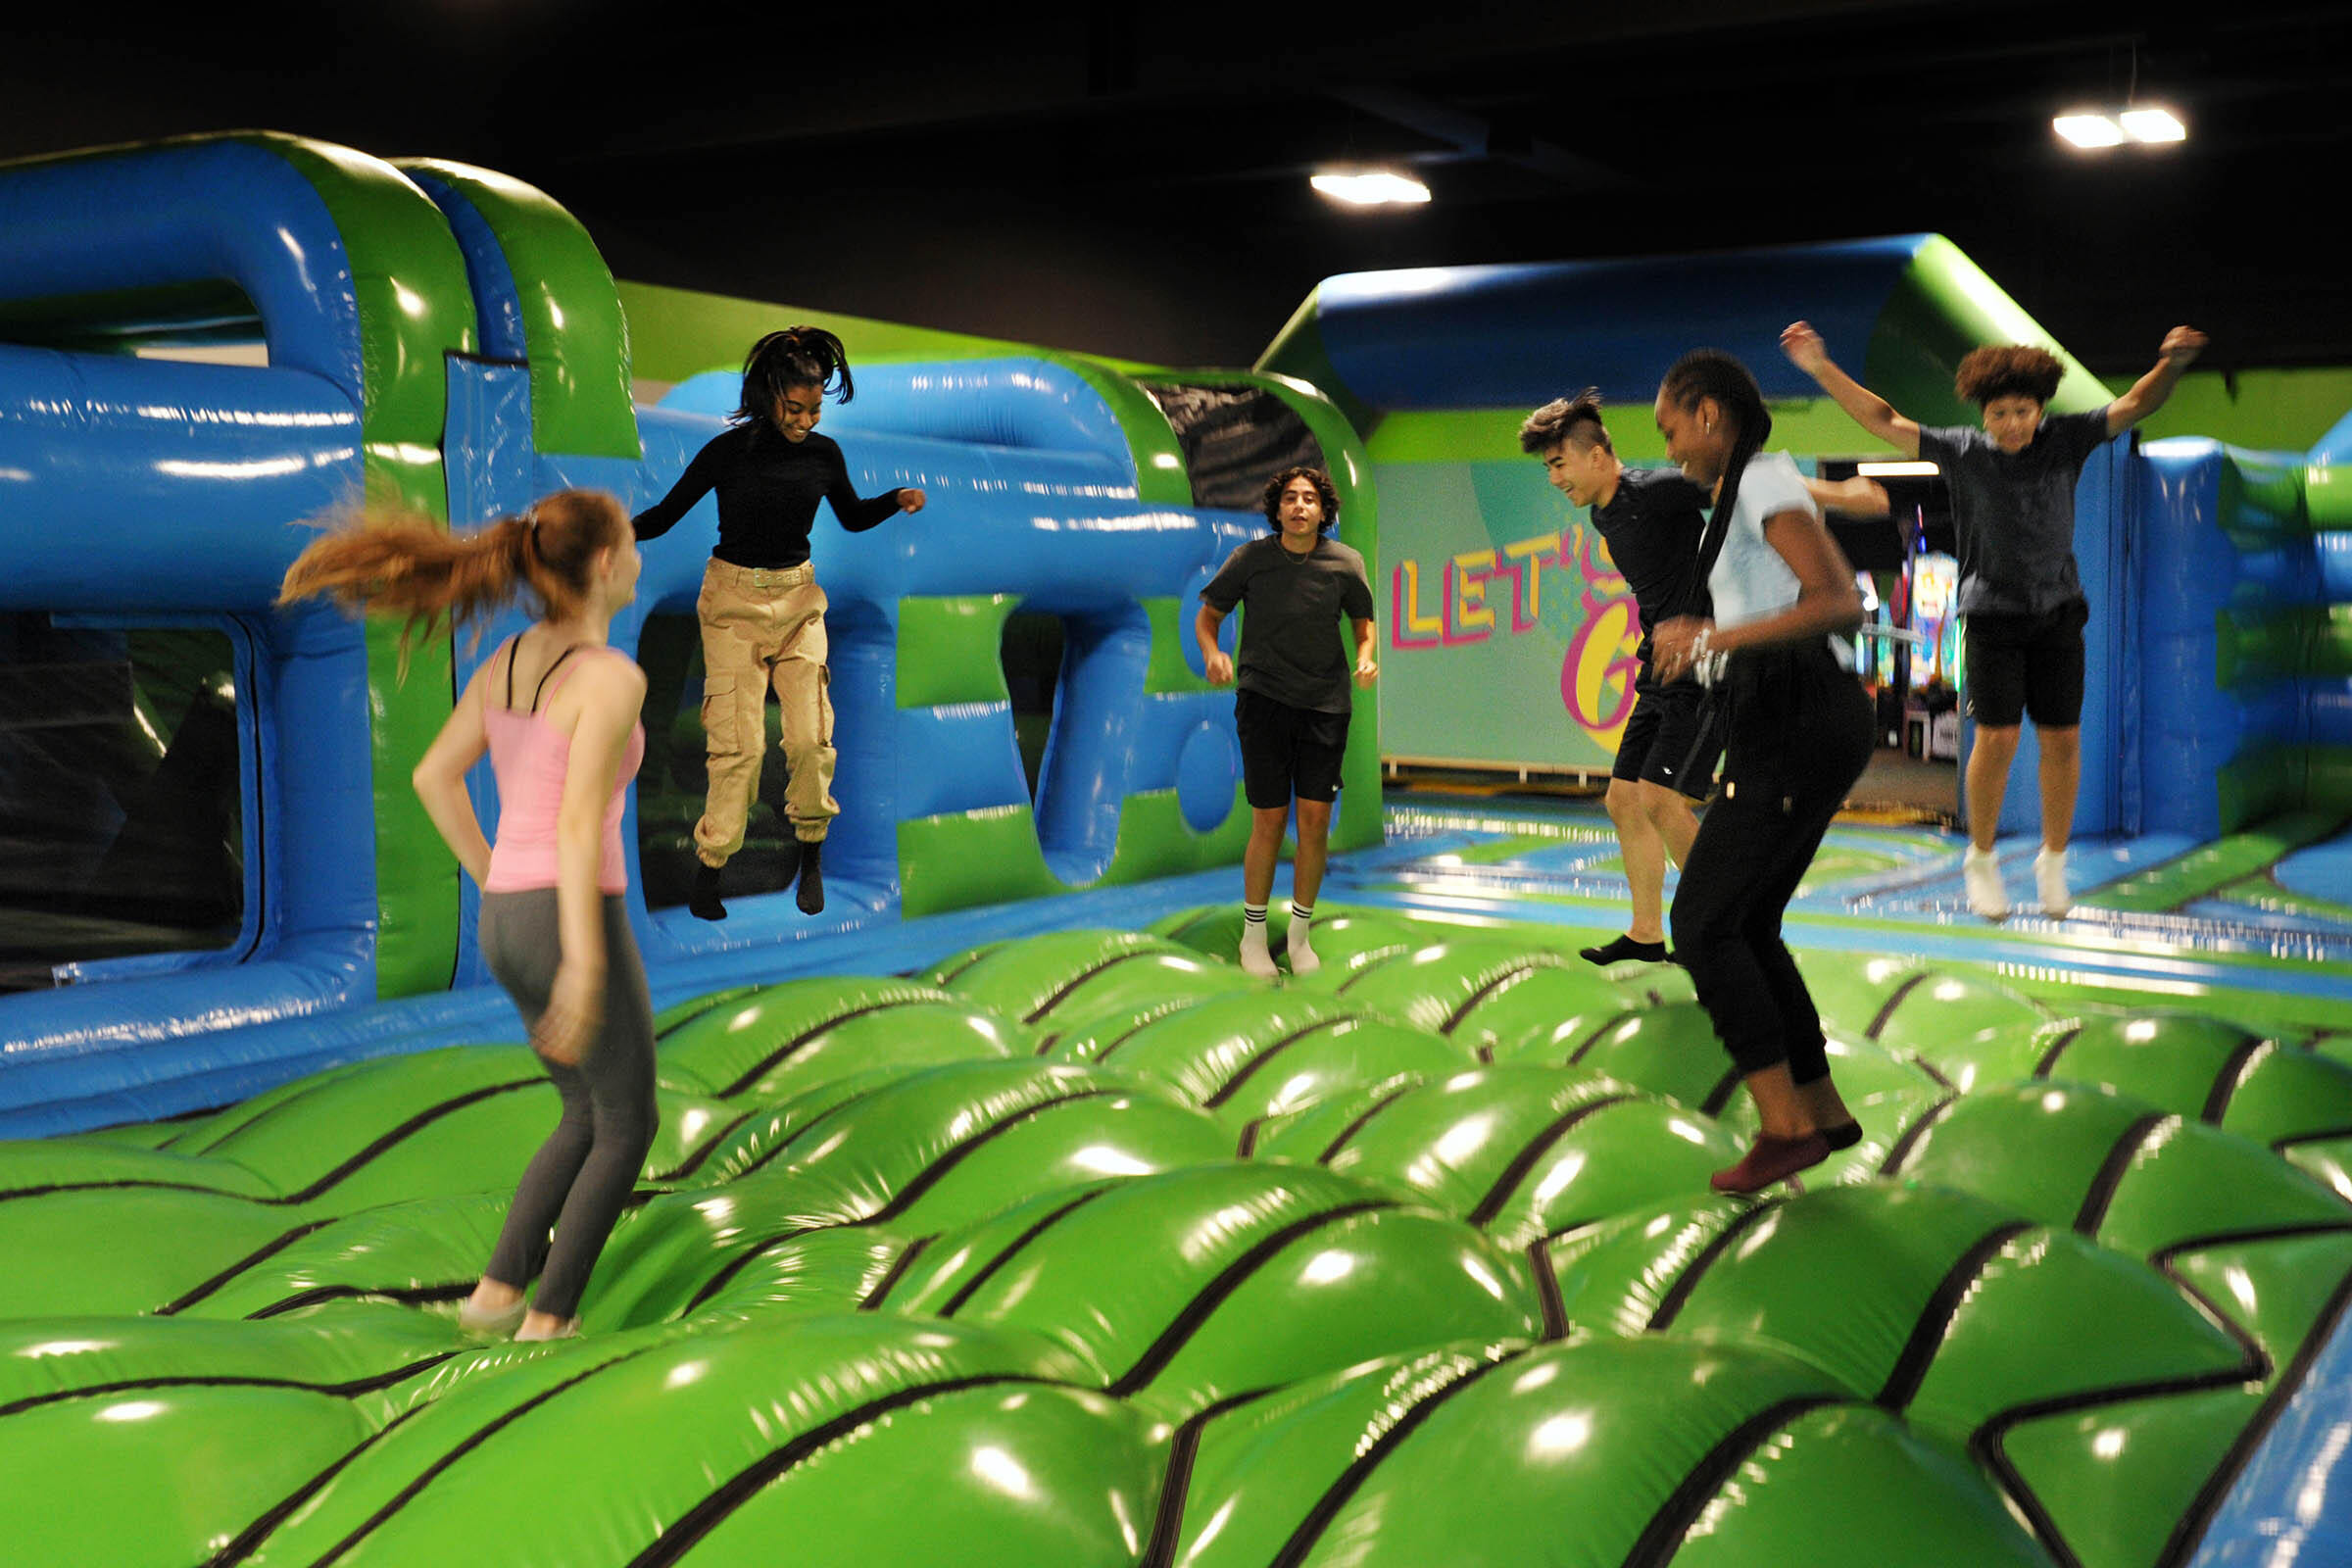 Children having fun, as they jump in an inflatable bounce house.